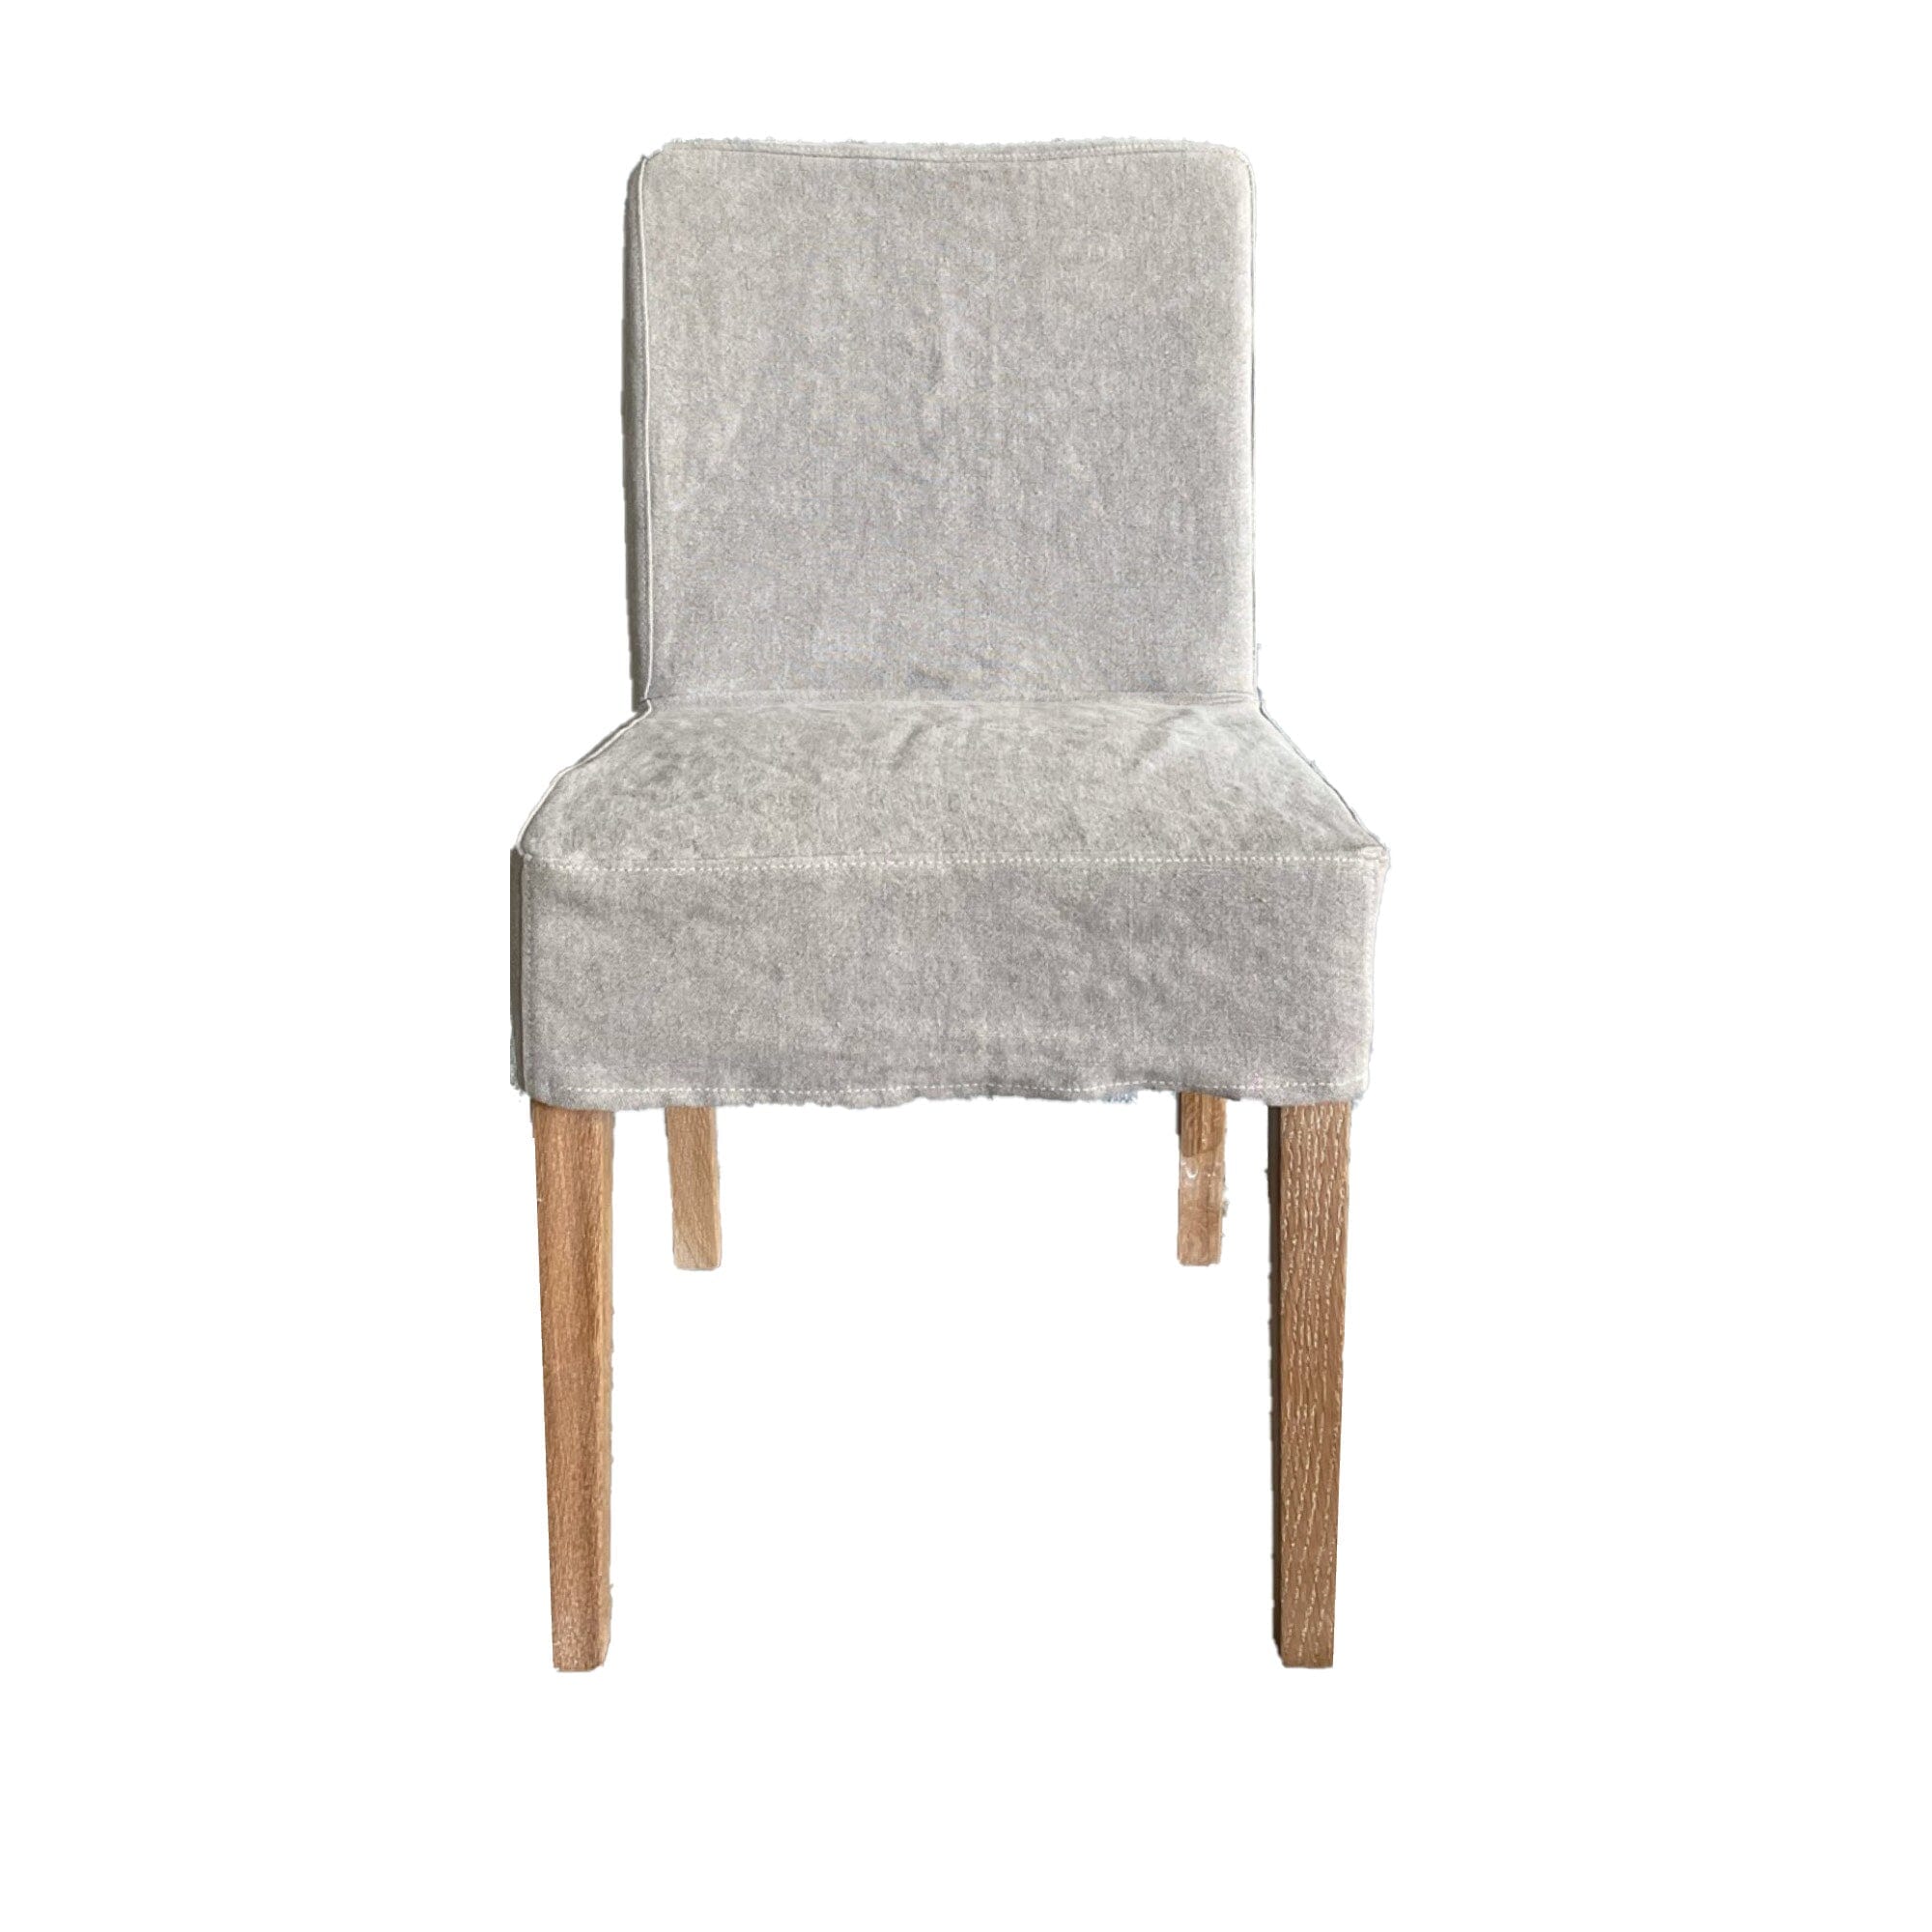 Collaroy Low Back Chair Dining Furniture Beachwood Designs Shale Linen 